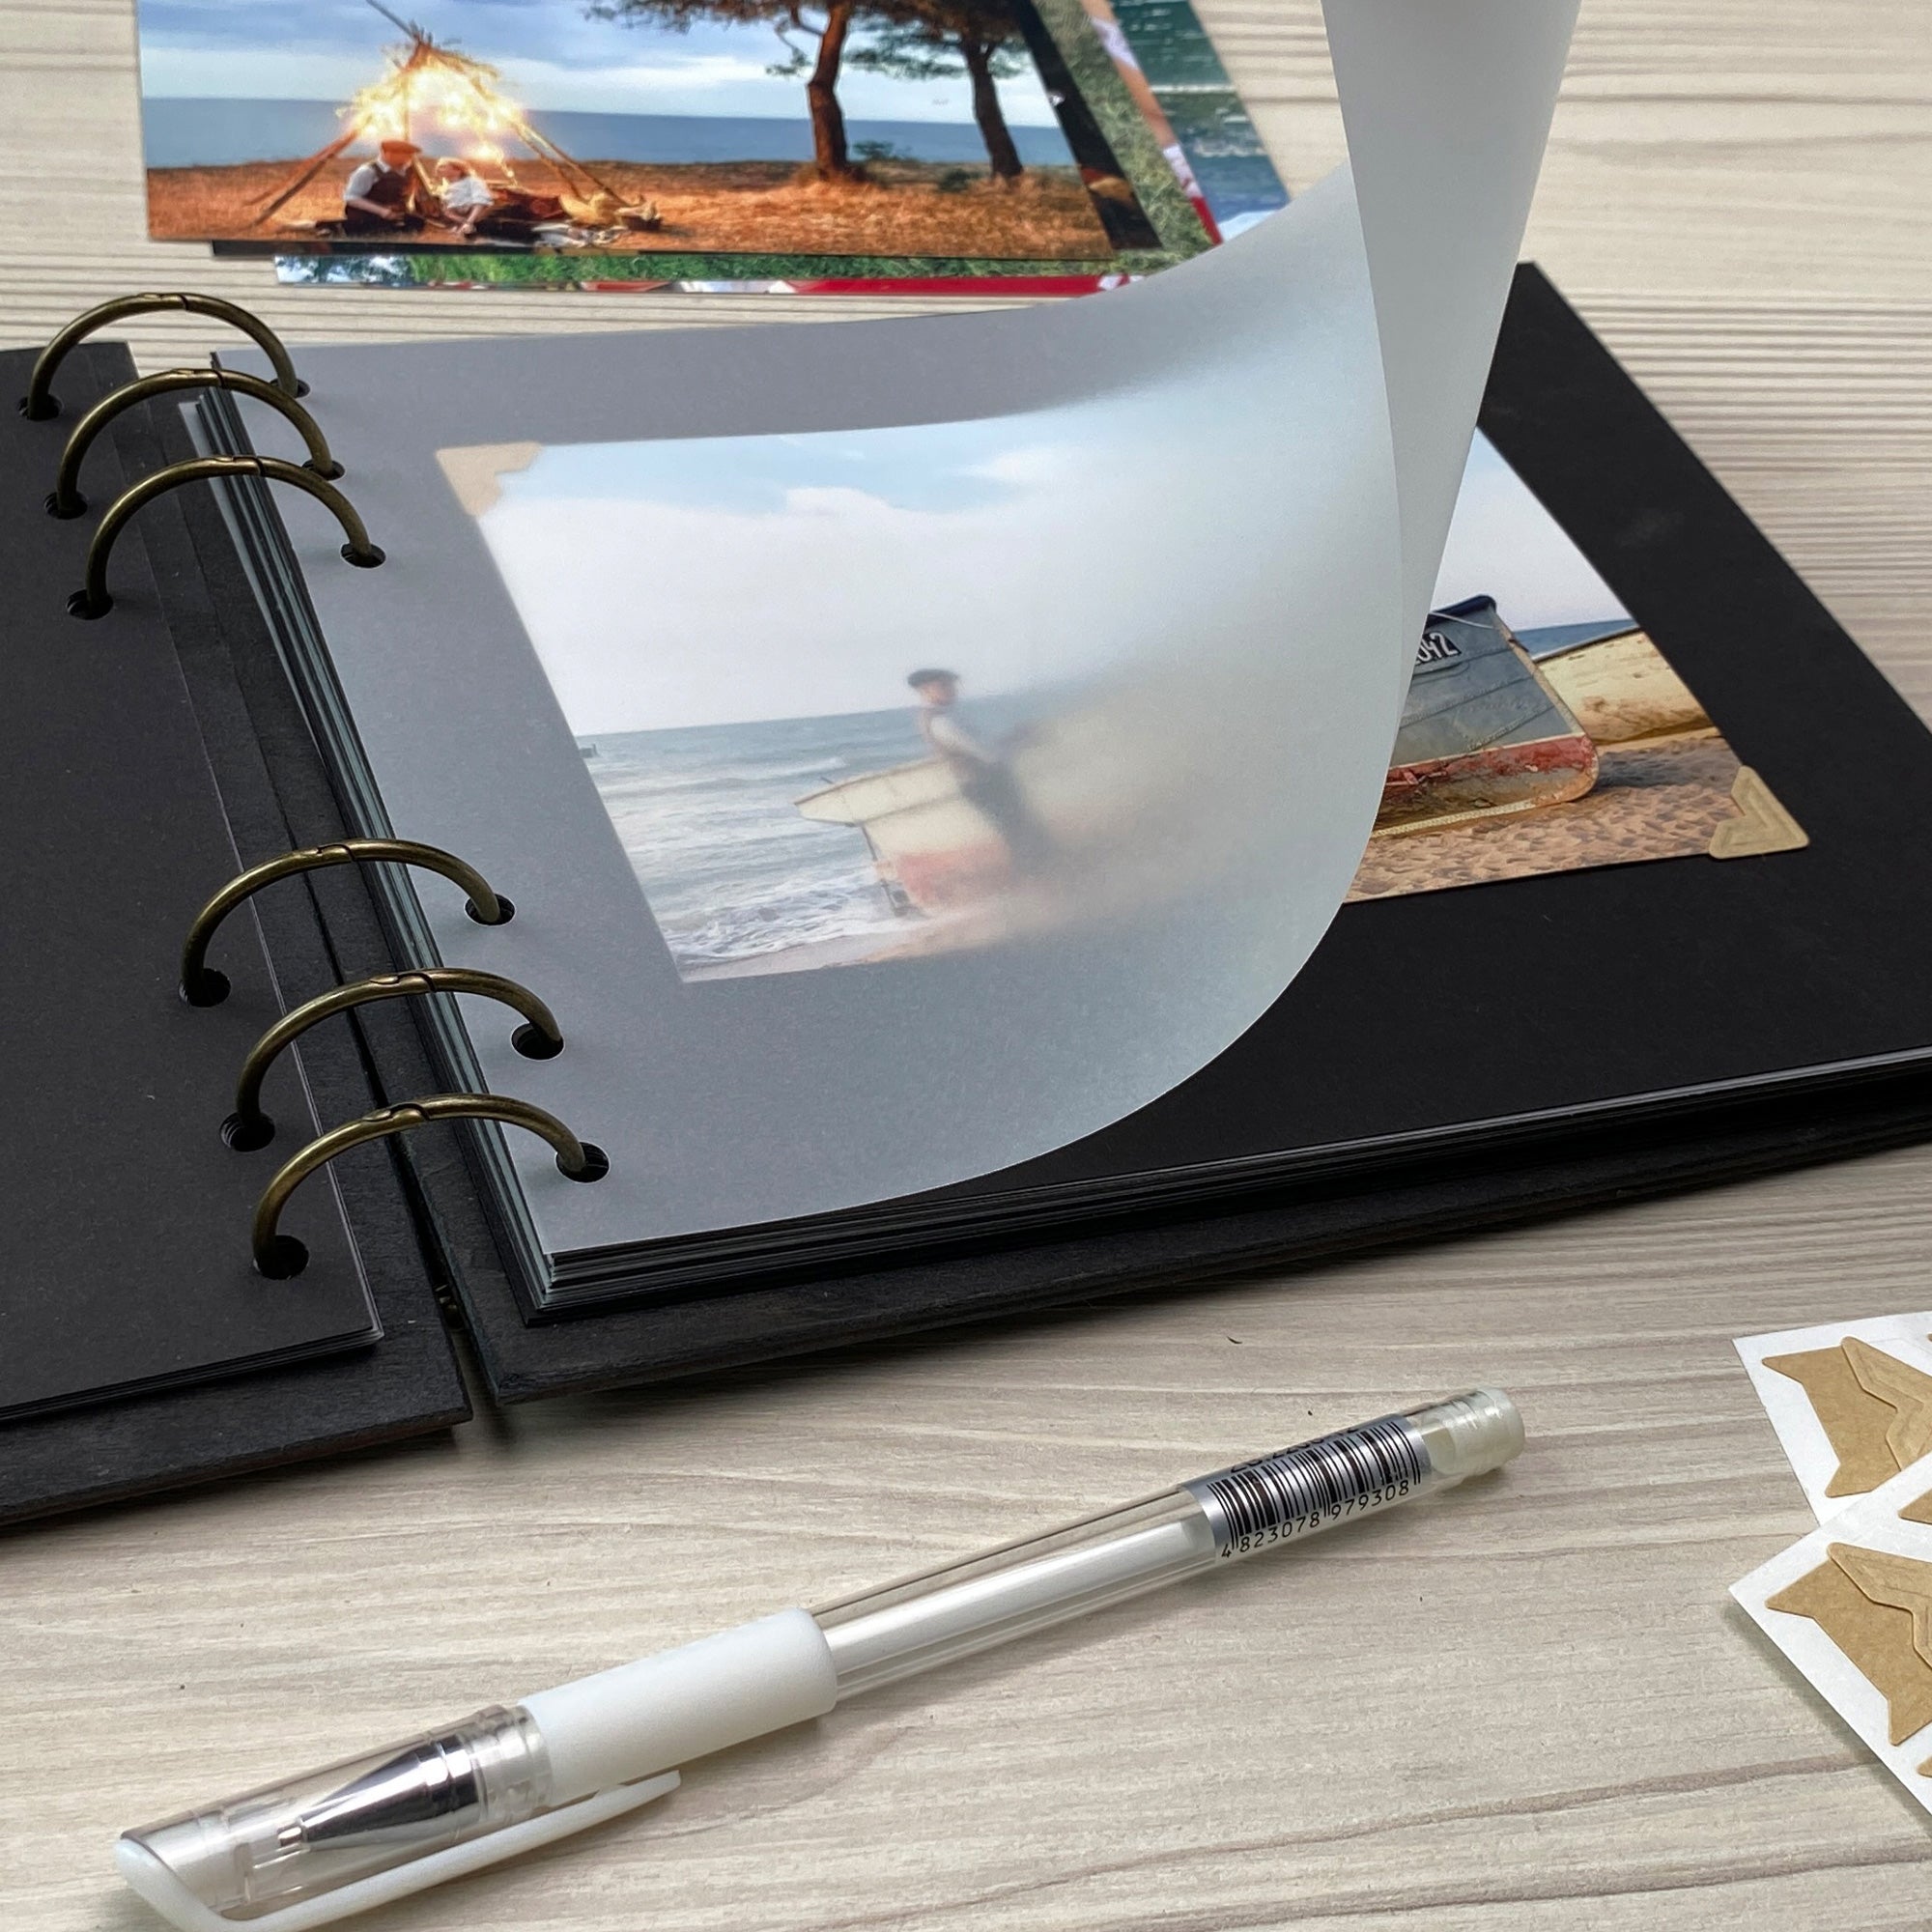 Personalized photo album cover and Earth engraving